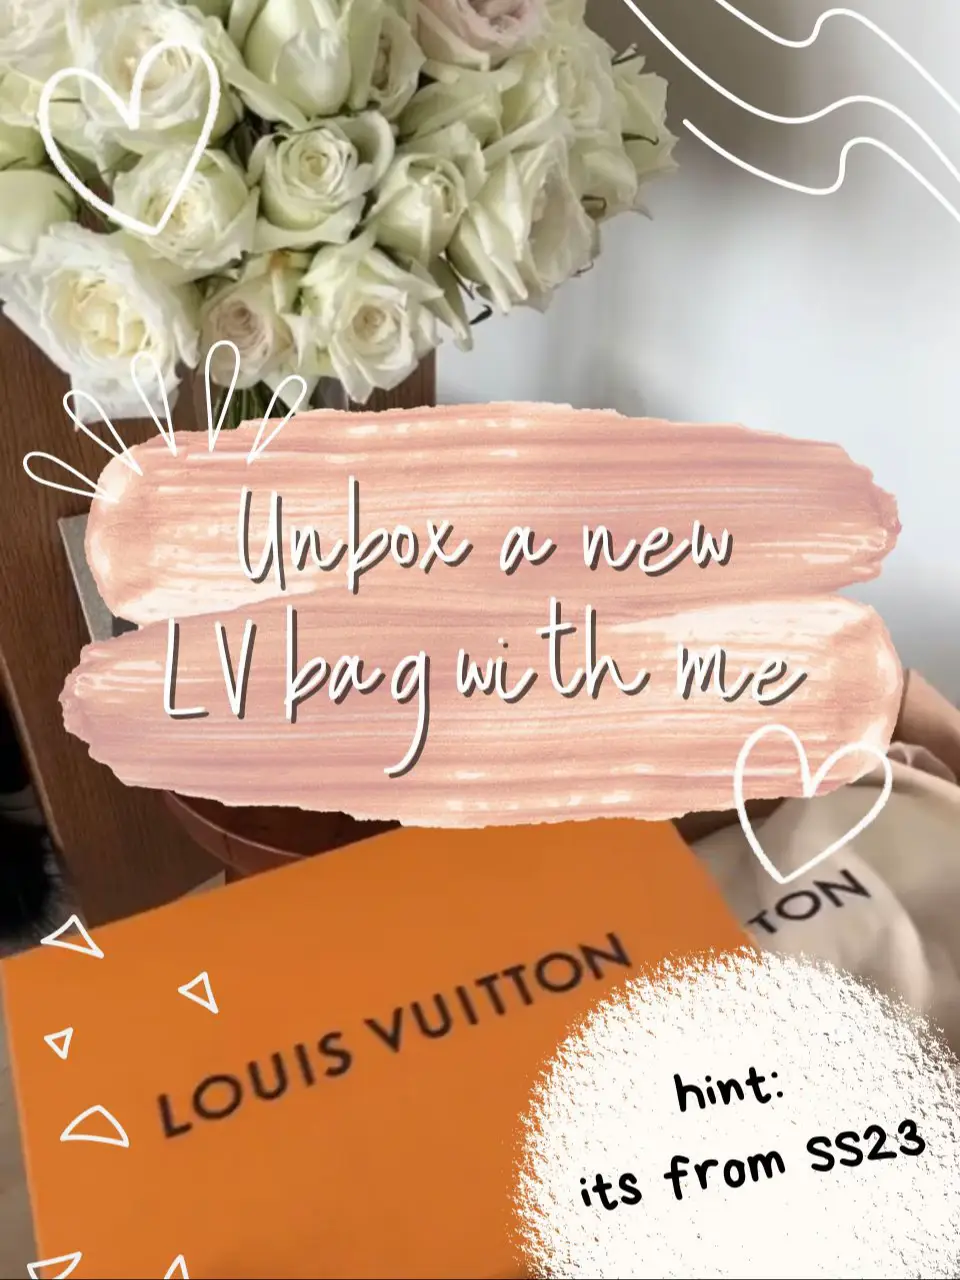 My favorite Louis Vuitton items! I actually love the bubble wand! #lou